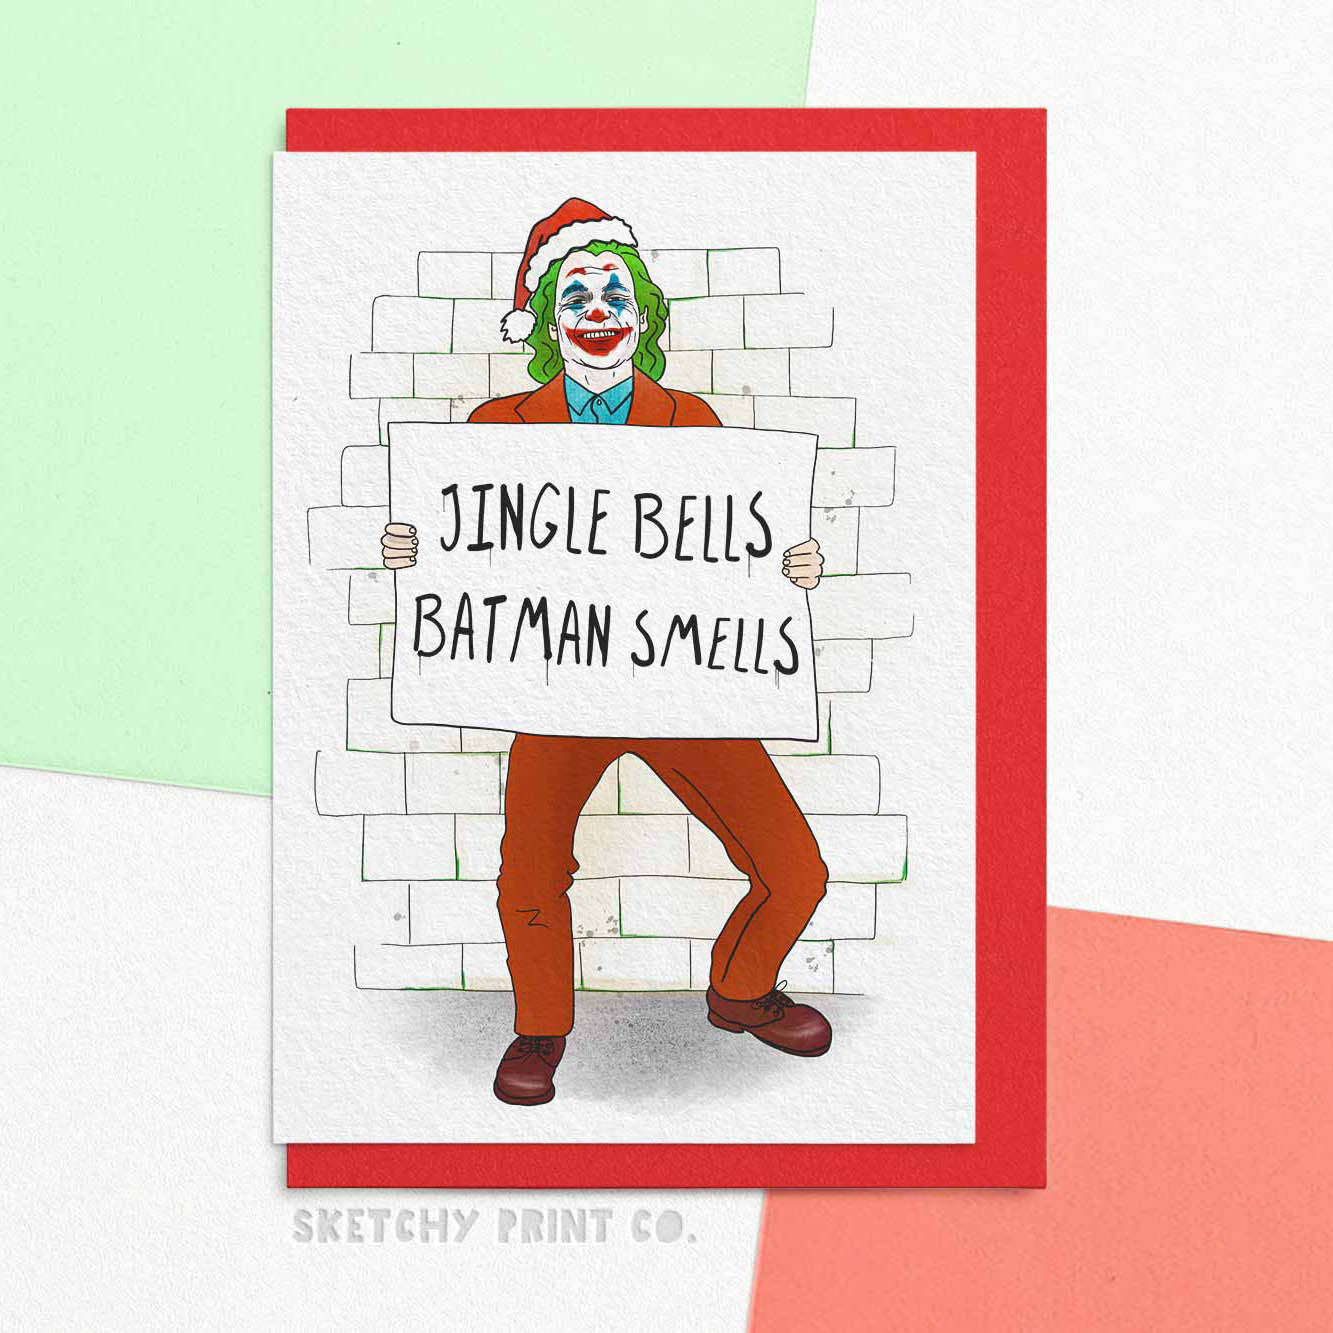 Funny Christmas Cards Joker jingle bells boyfriend girlfriend unique gift unusual hilarious illustrated sketchy print co